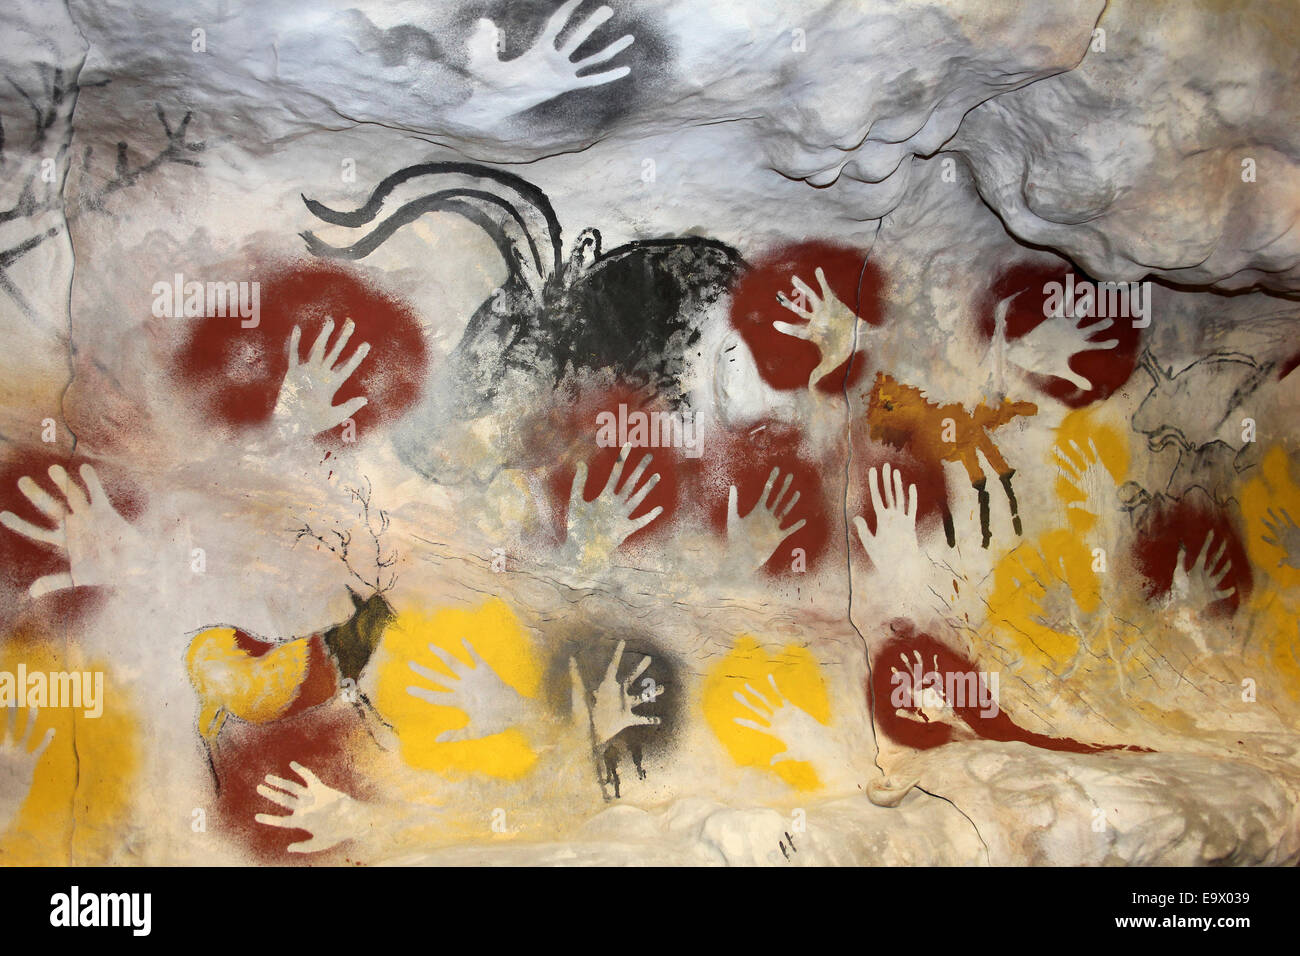 Modern Reproduction Of Cave Paintings And Hand Stencil Prints Stock Photo